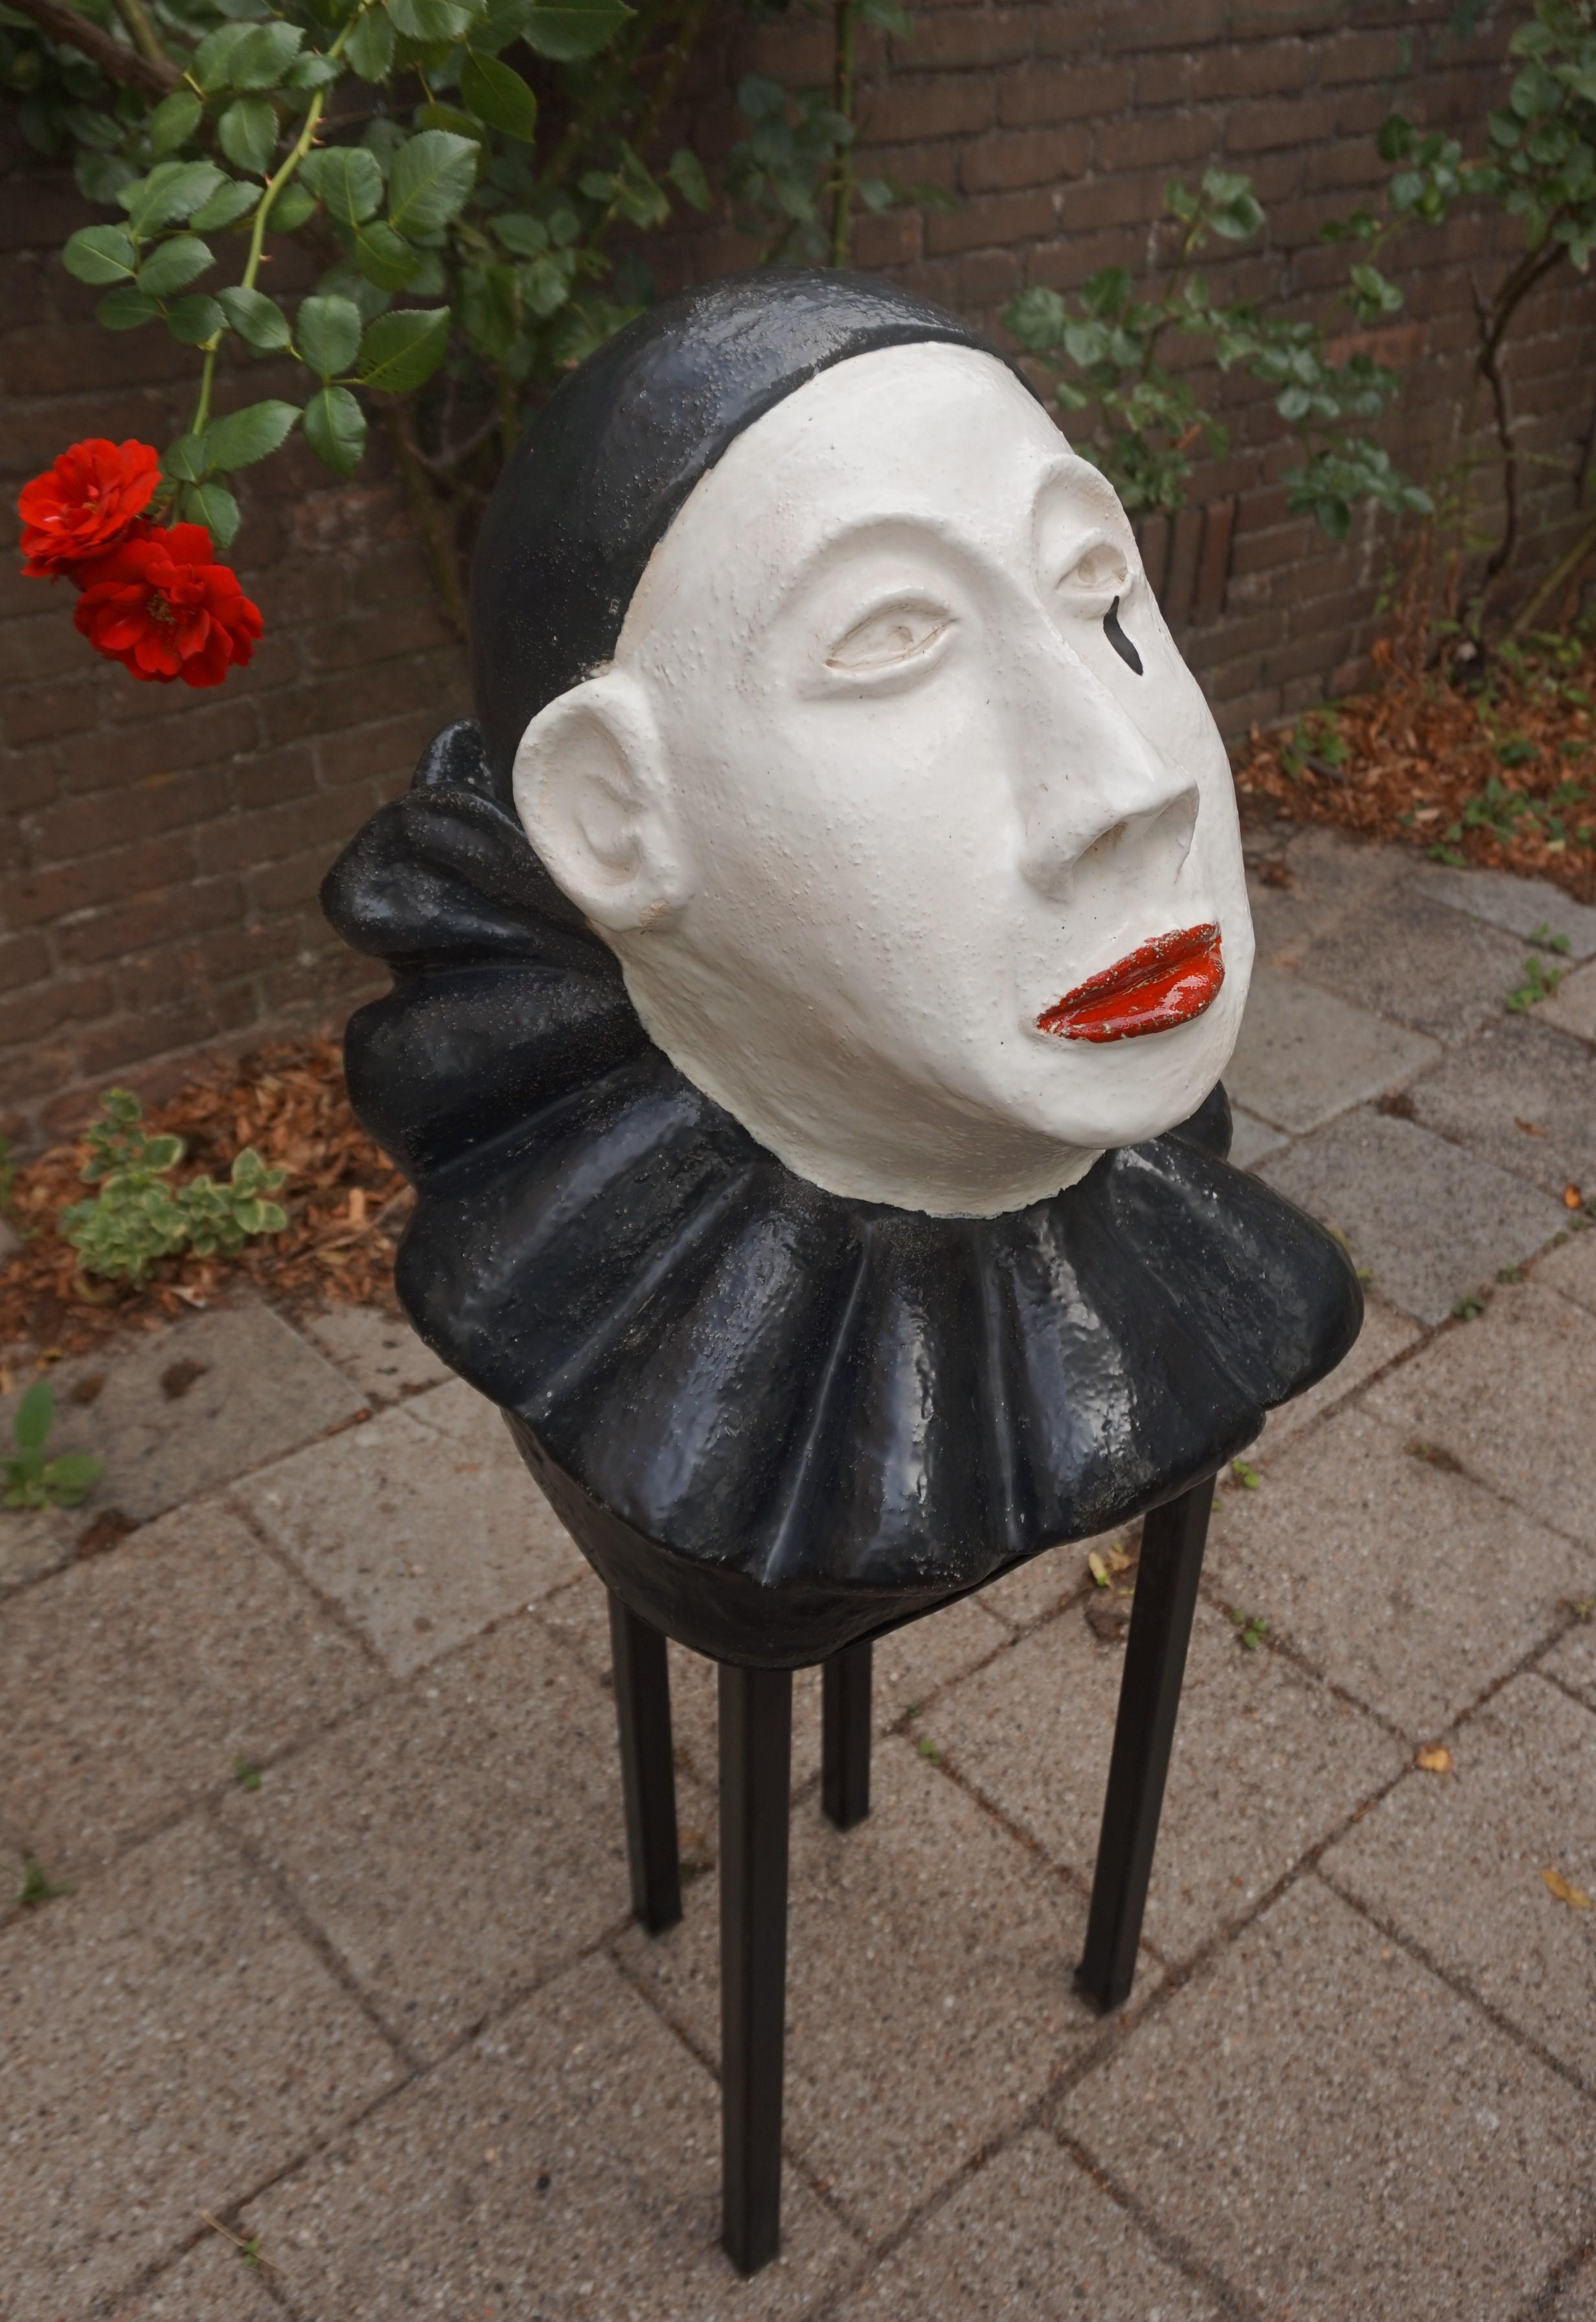 One of a kind and impressive pierrot sculpture on an iron base.

Born as one of the archetypes in the early 18th century, Italian 'commedia dell'arte', the Pierrot (or Pedrolino) character has, over the centuries, become worldfamous. The story and